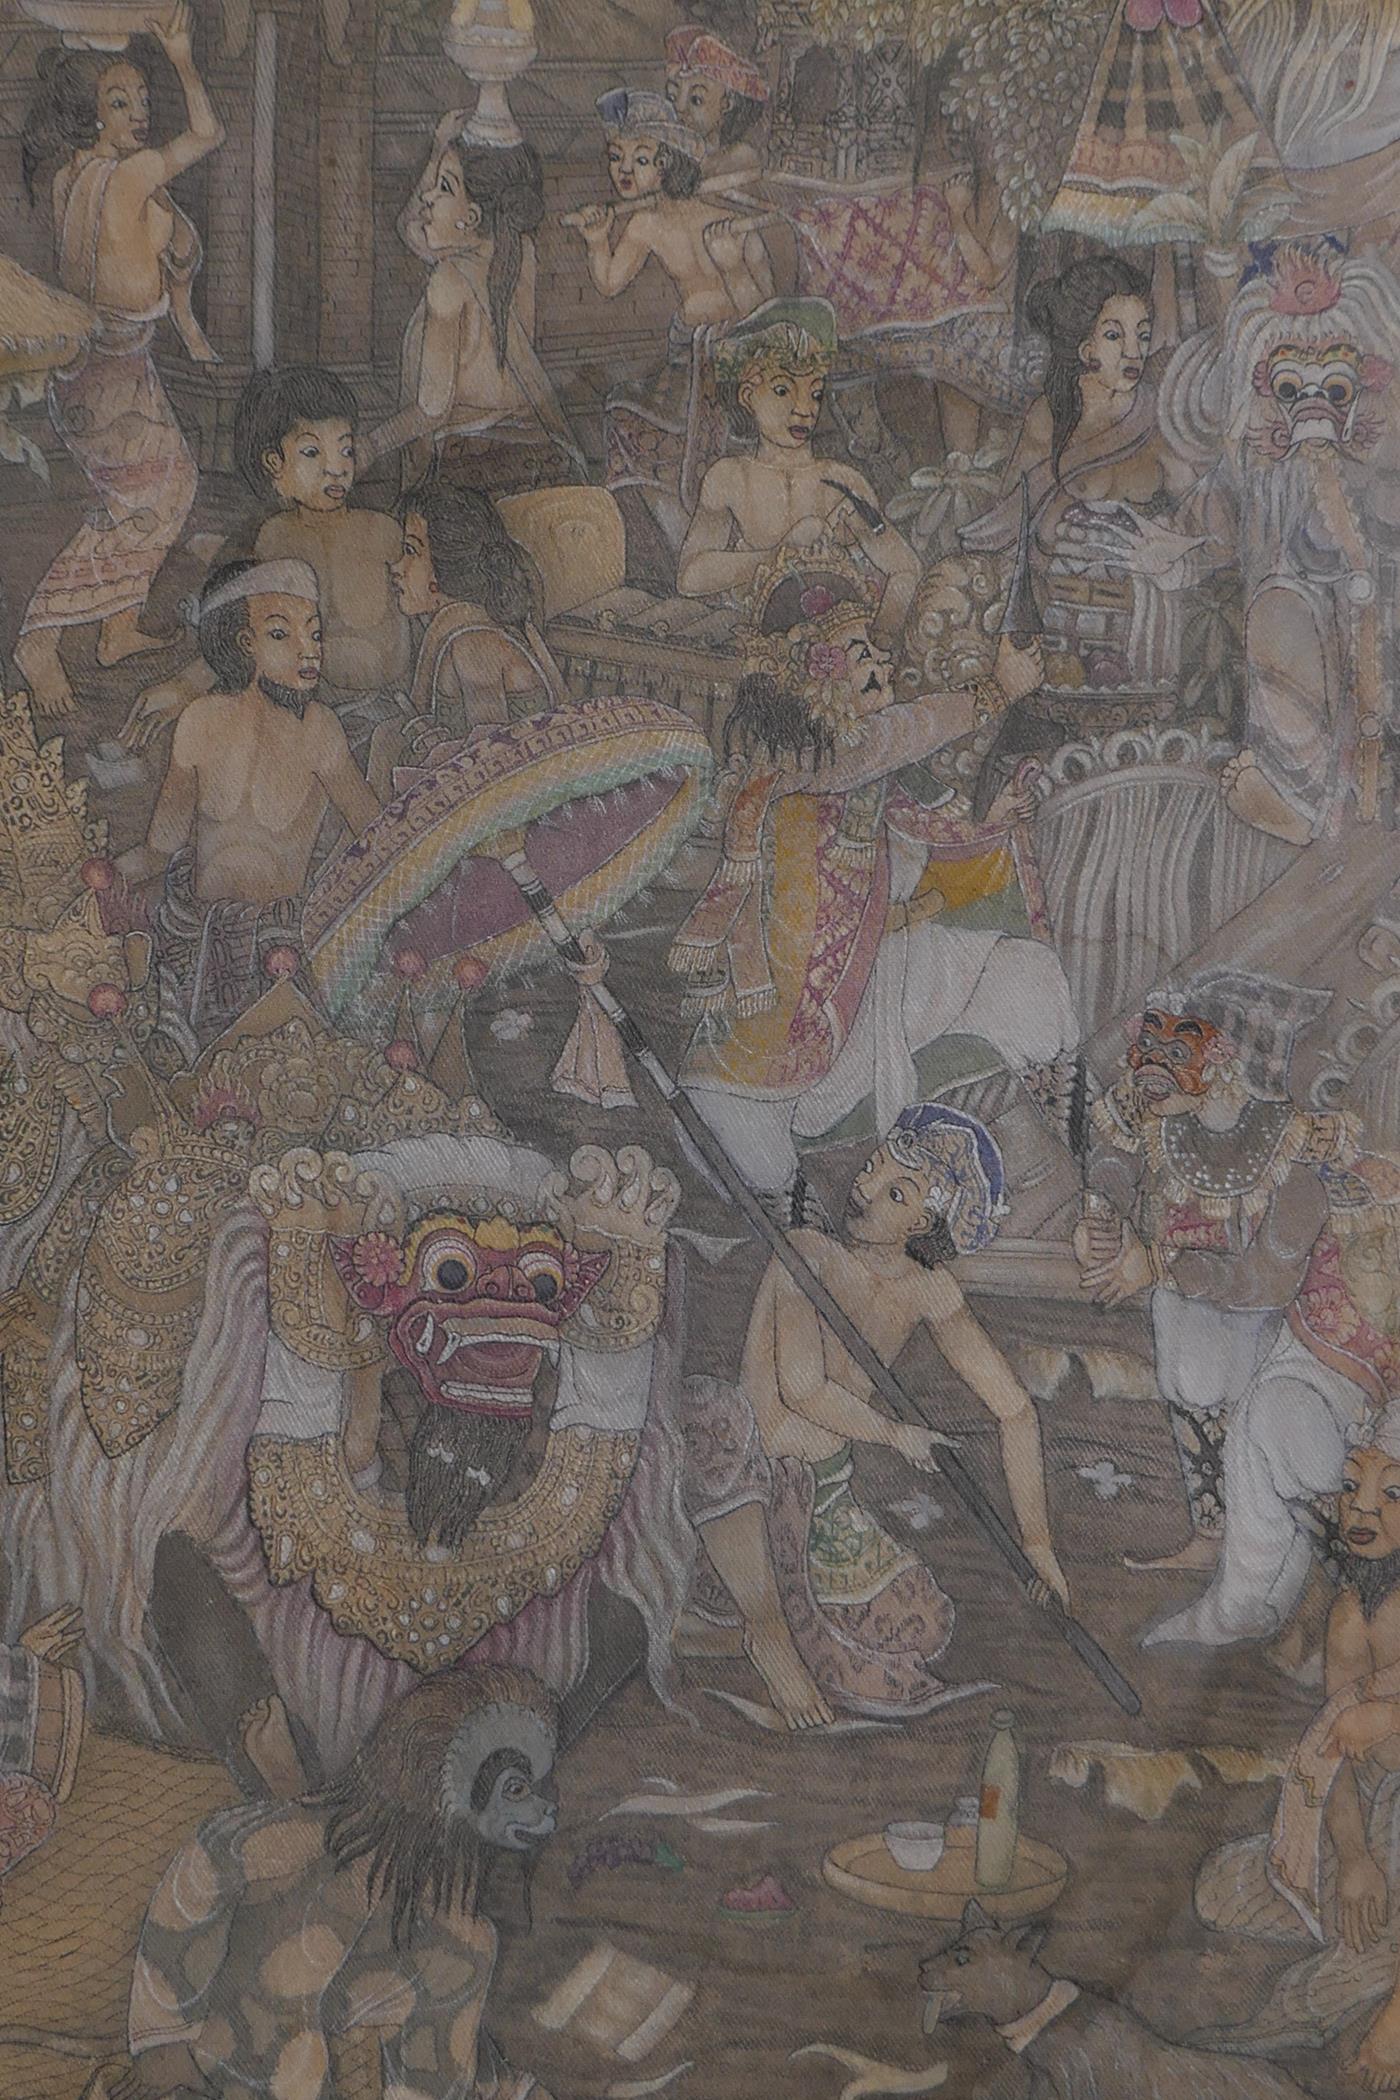 Balinese School, procession with dragon, indistinctly signed and inscribed Kutuh Ubud, Bali, ink and